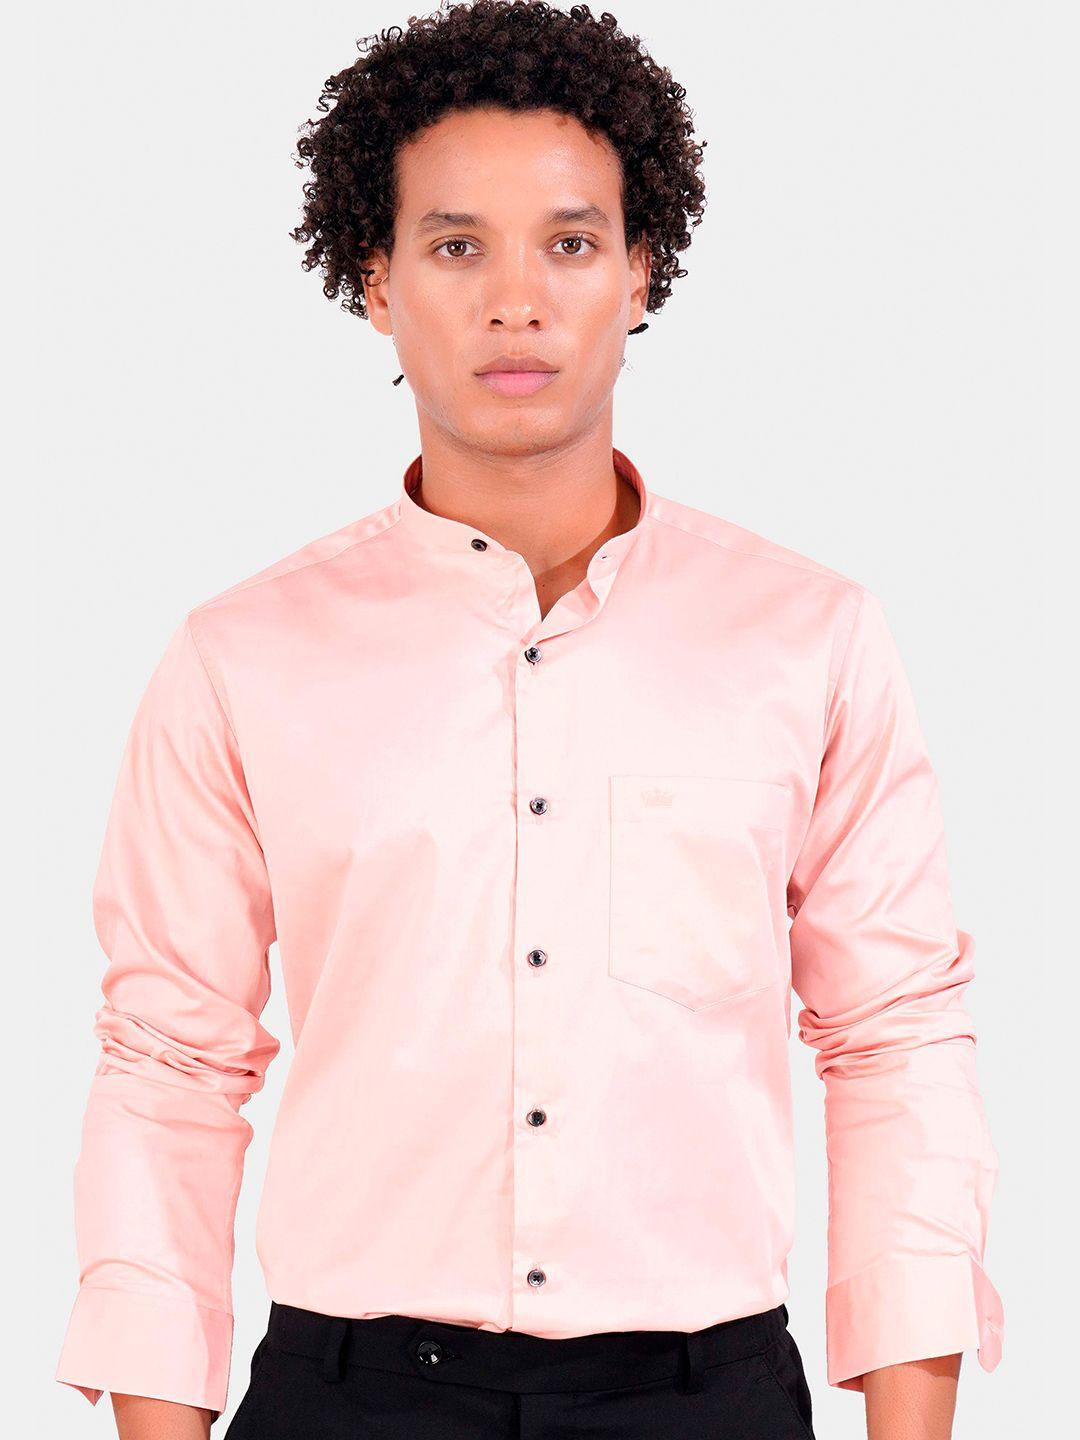 french crown men pink standard opaque printed formal shirt